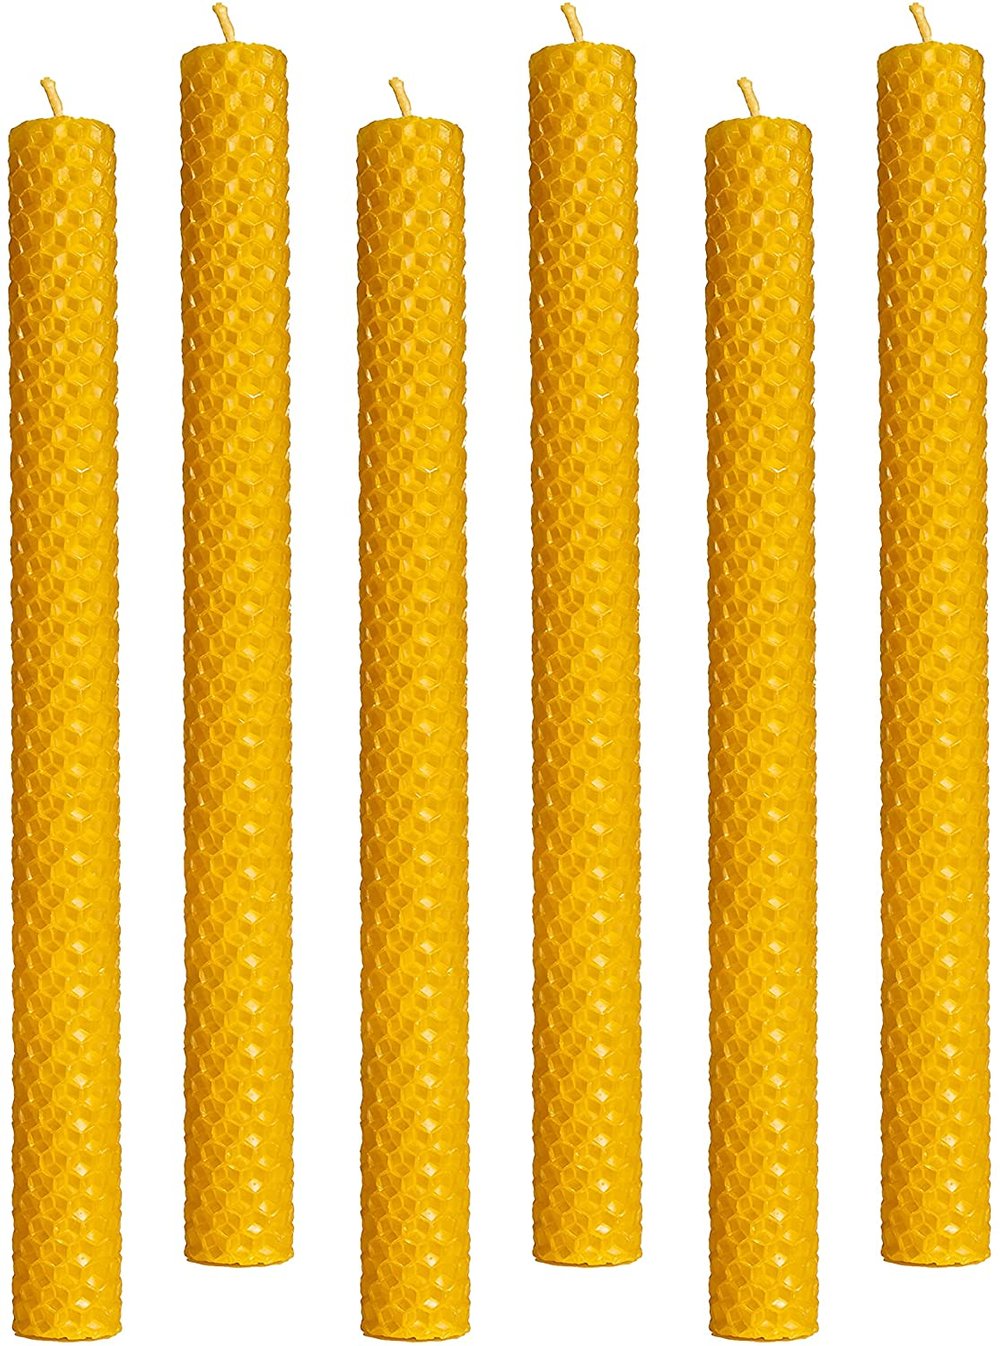 Pure Beeswax Honeycomb Tapers, Amazon